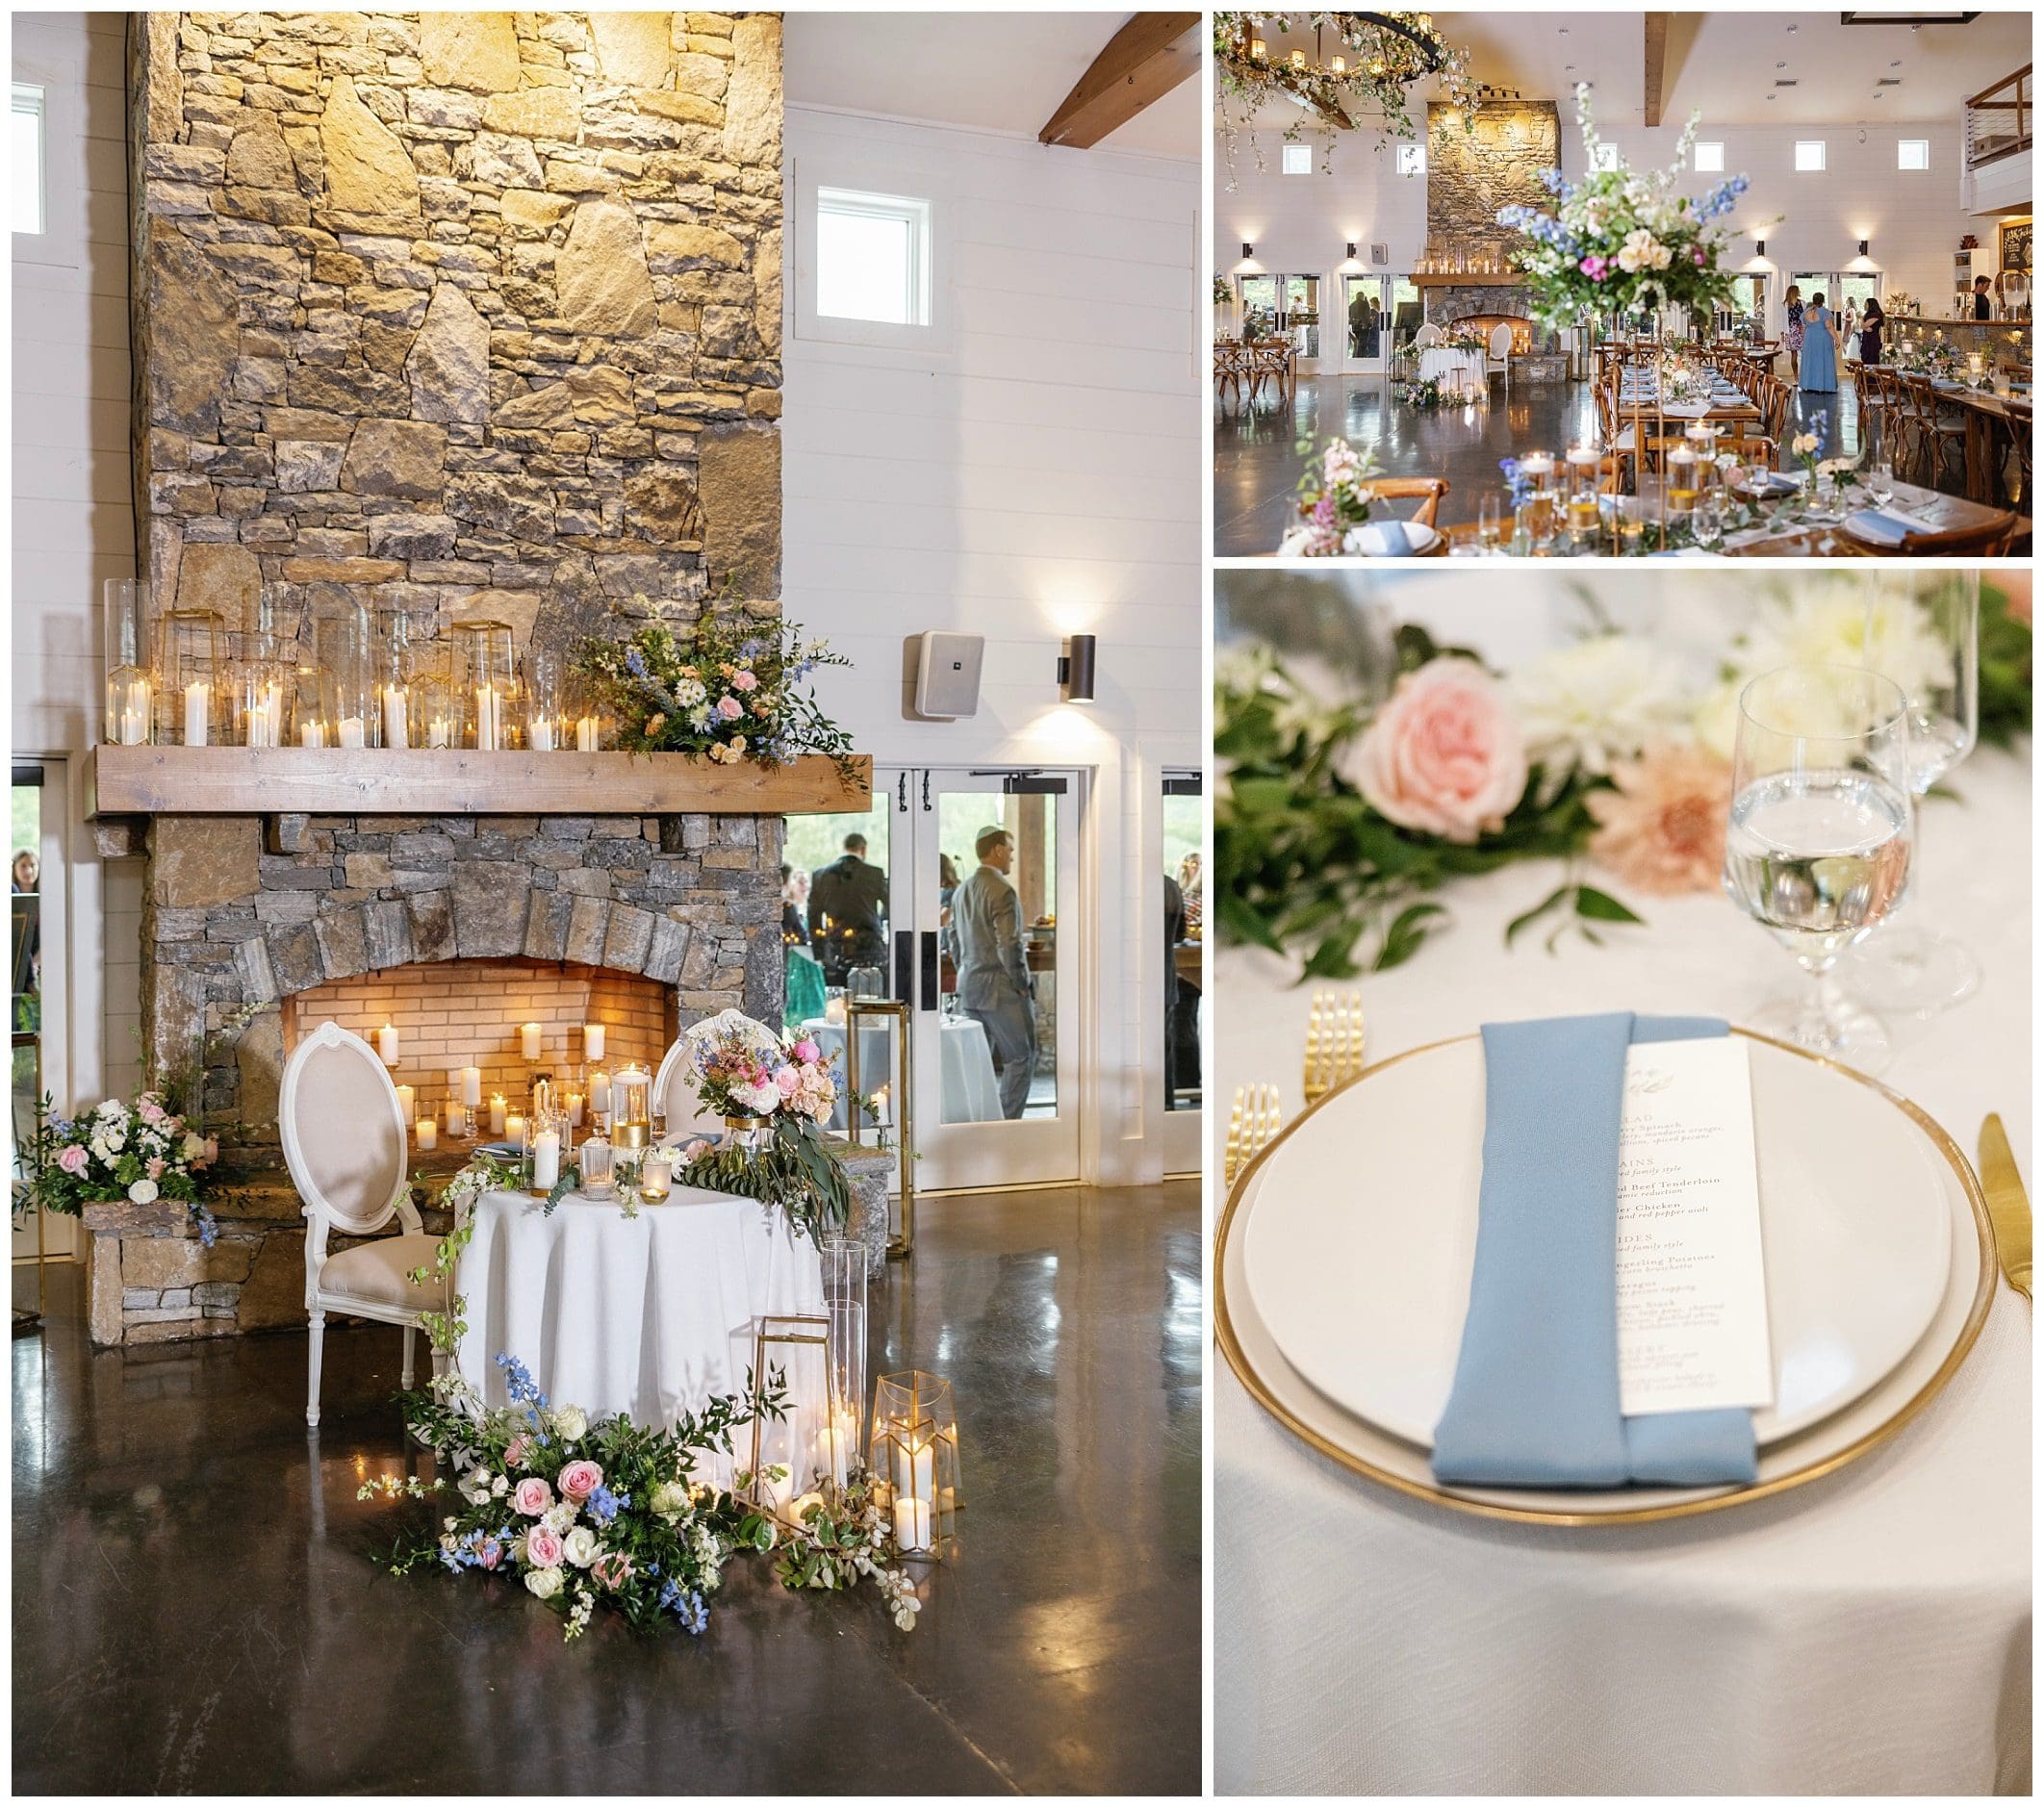 Spring wedding with blue accents at chestnut ridge wedding venue outside Asheville NC